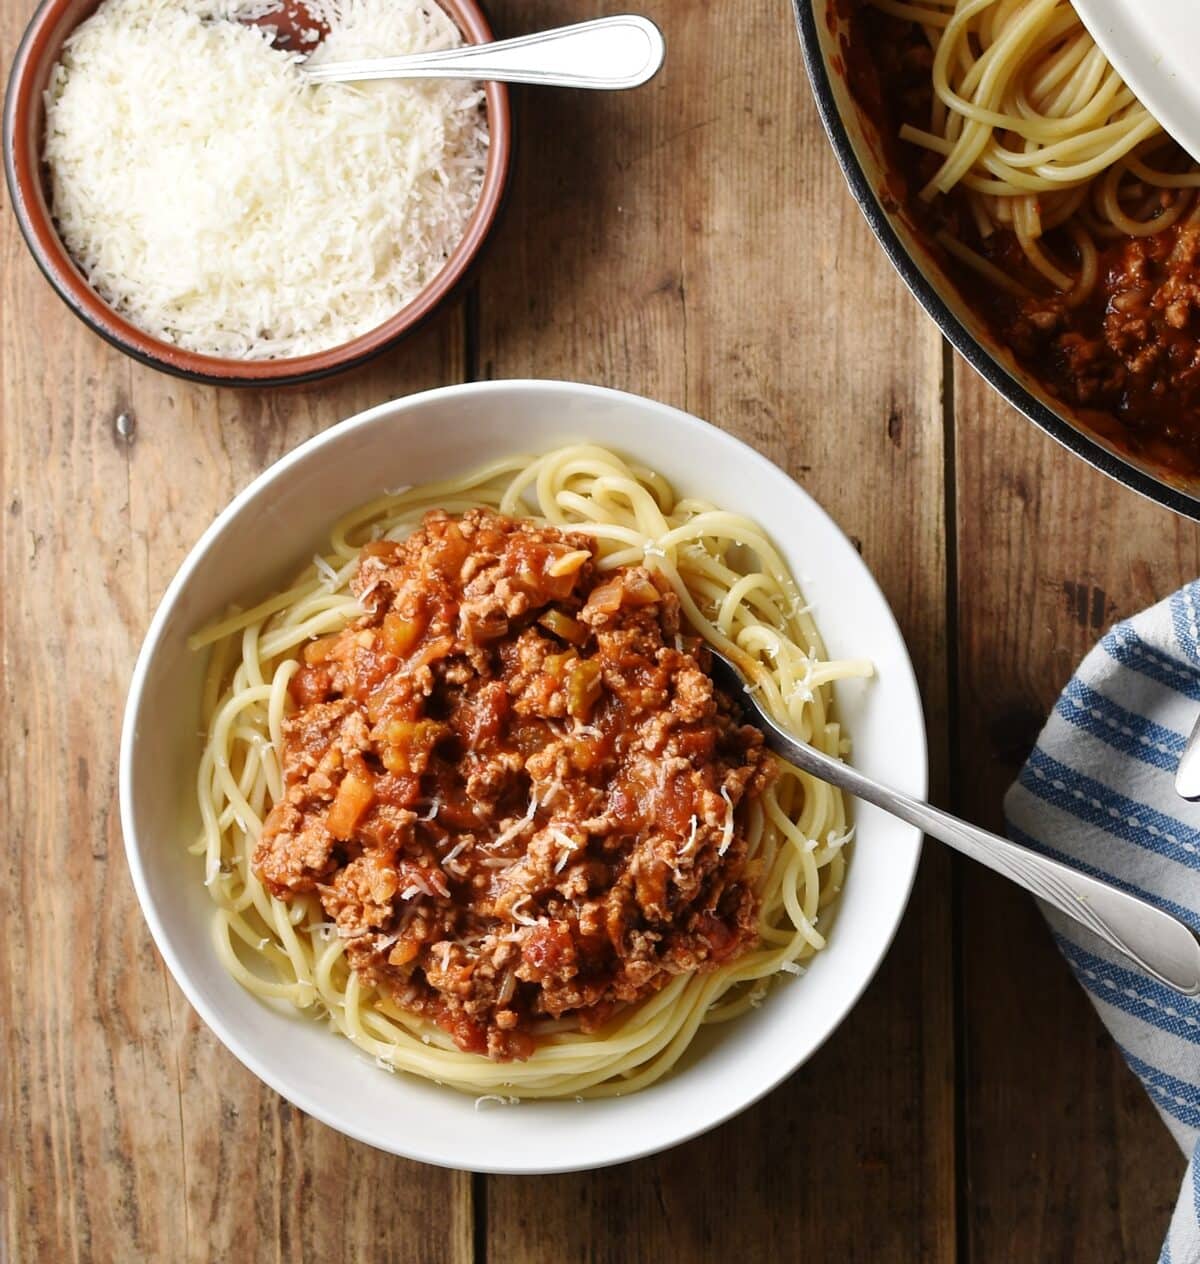 Spaghetti bolognese in white bowl with fork, grated cheese in brown dish with spoon, spaghetti in pan and stripy blue cloth in background.